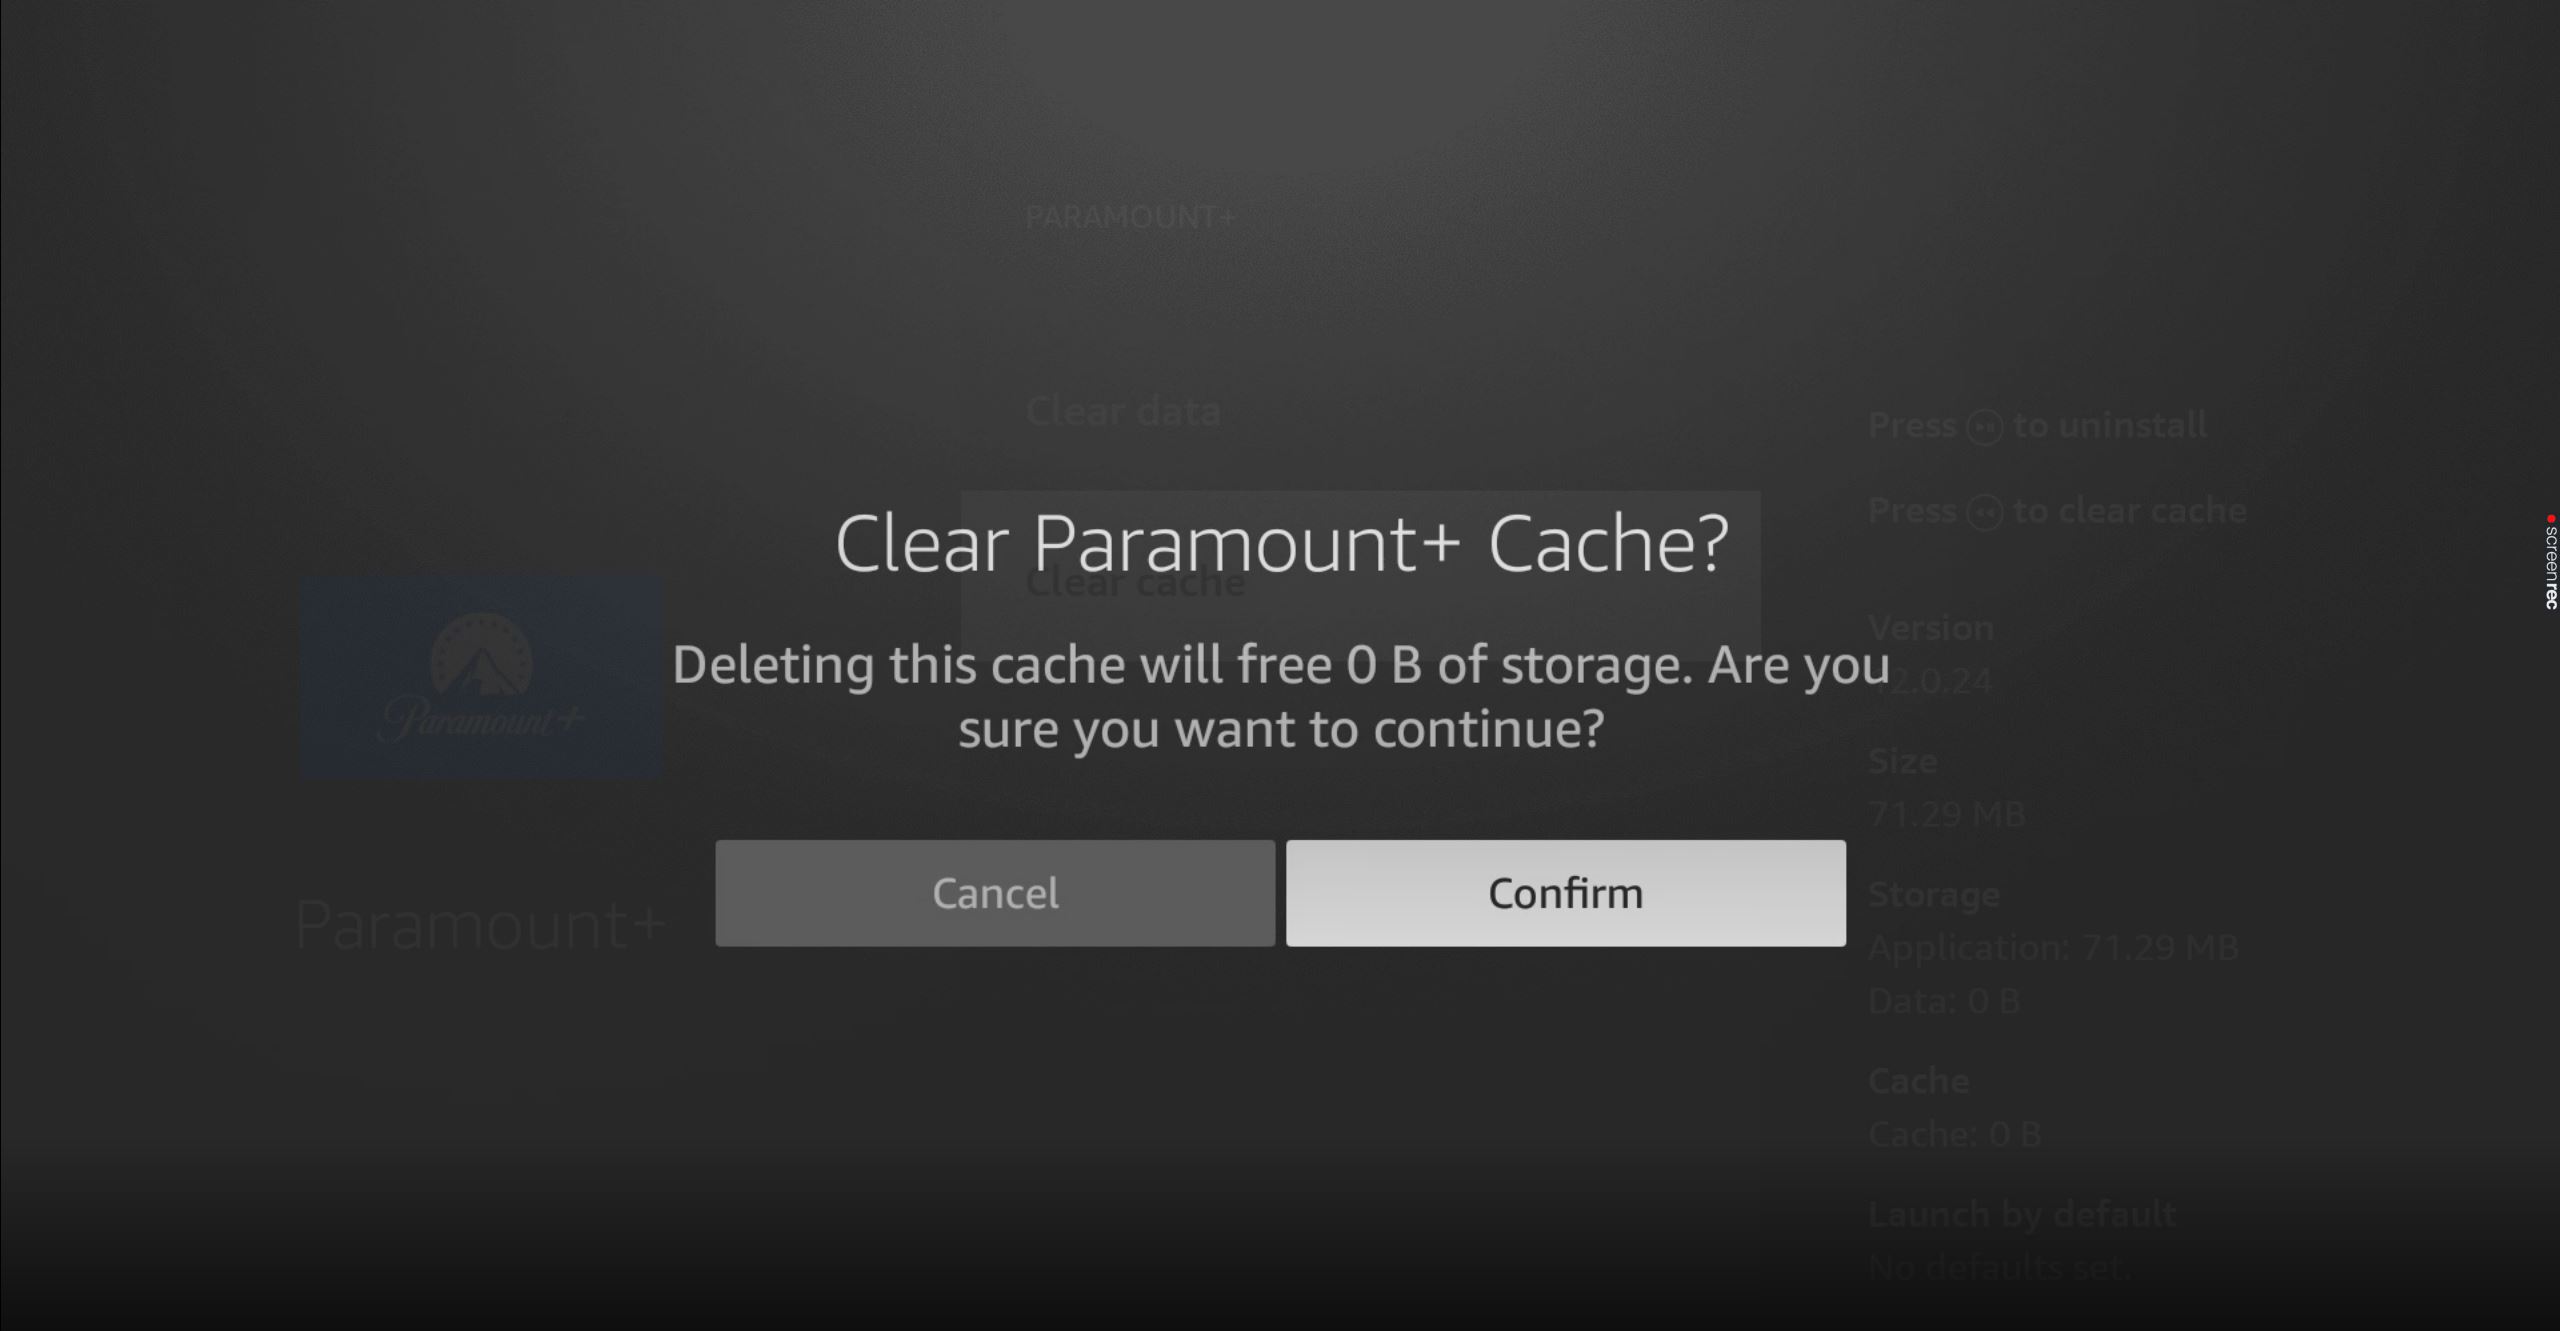 How to confirm clearing Paramount Plus cache on Amazon Firestick